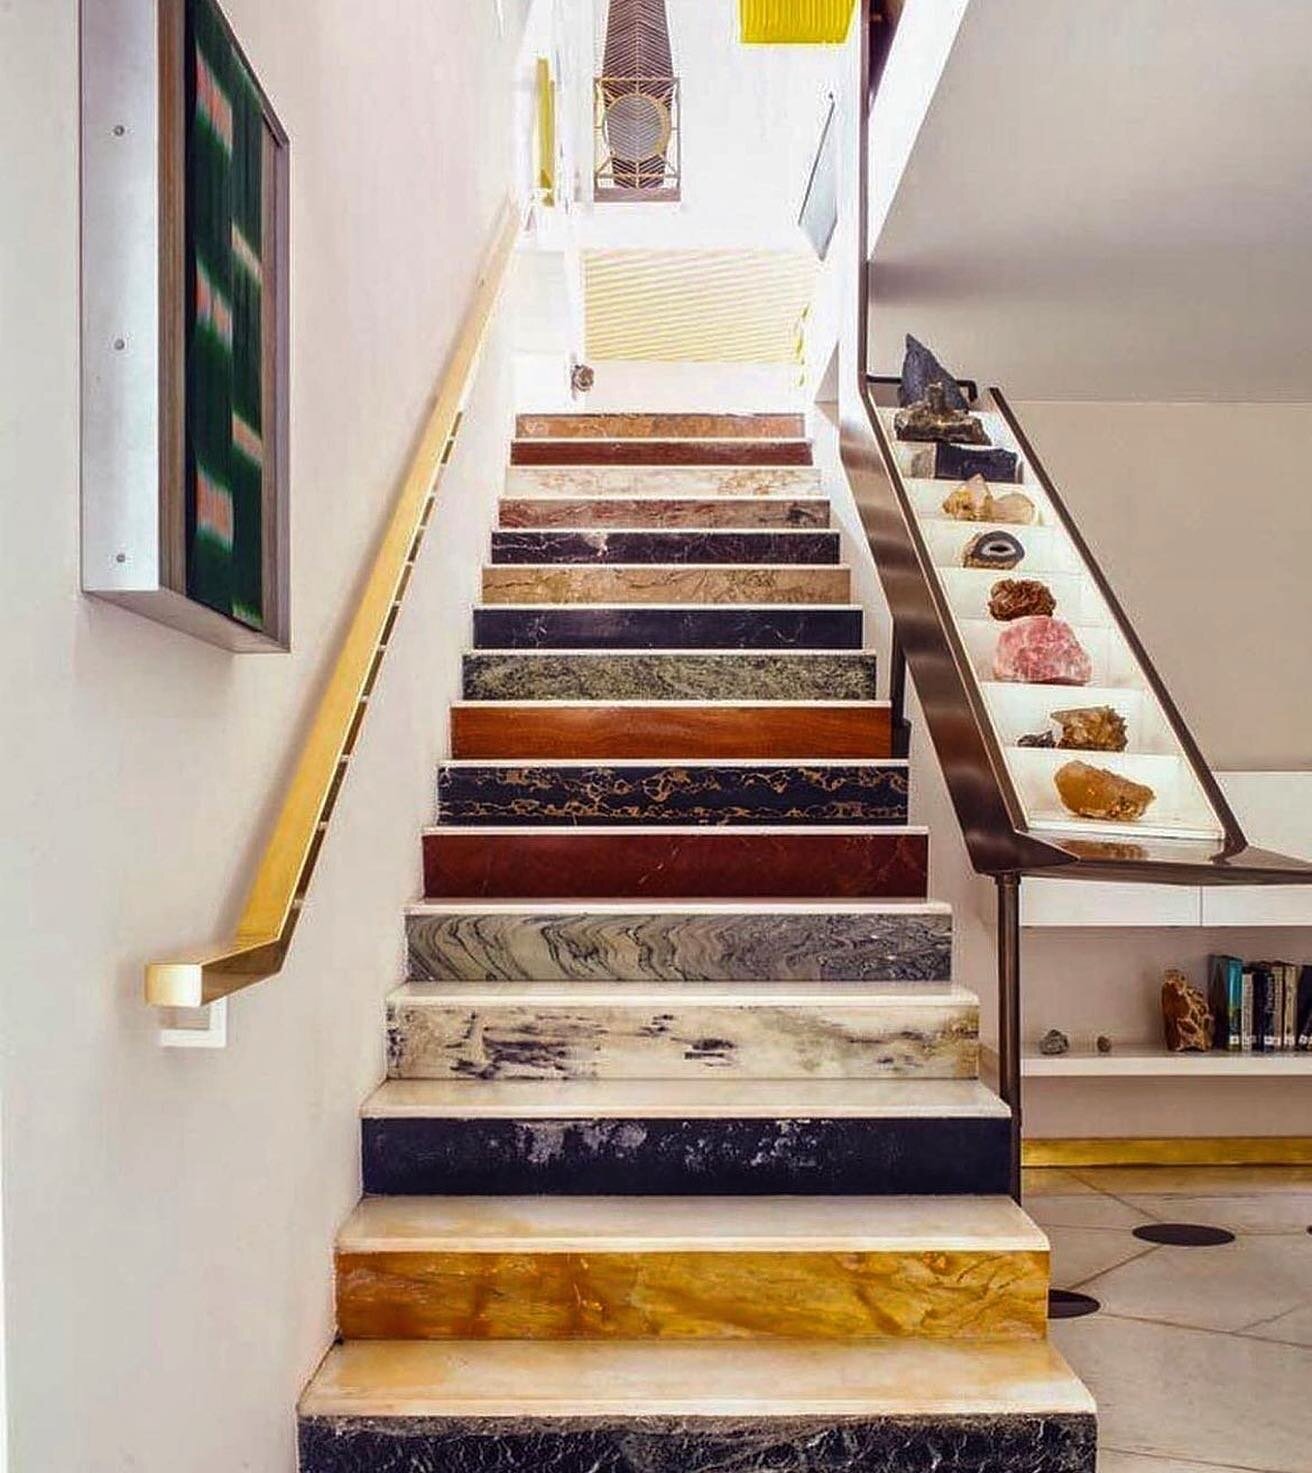 Gio Ponti marble staircase at Villa Planchart in Caracas, Venezuela. Such beautiful richness and contrast.